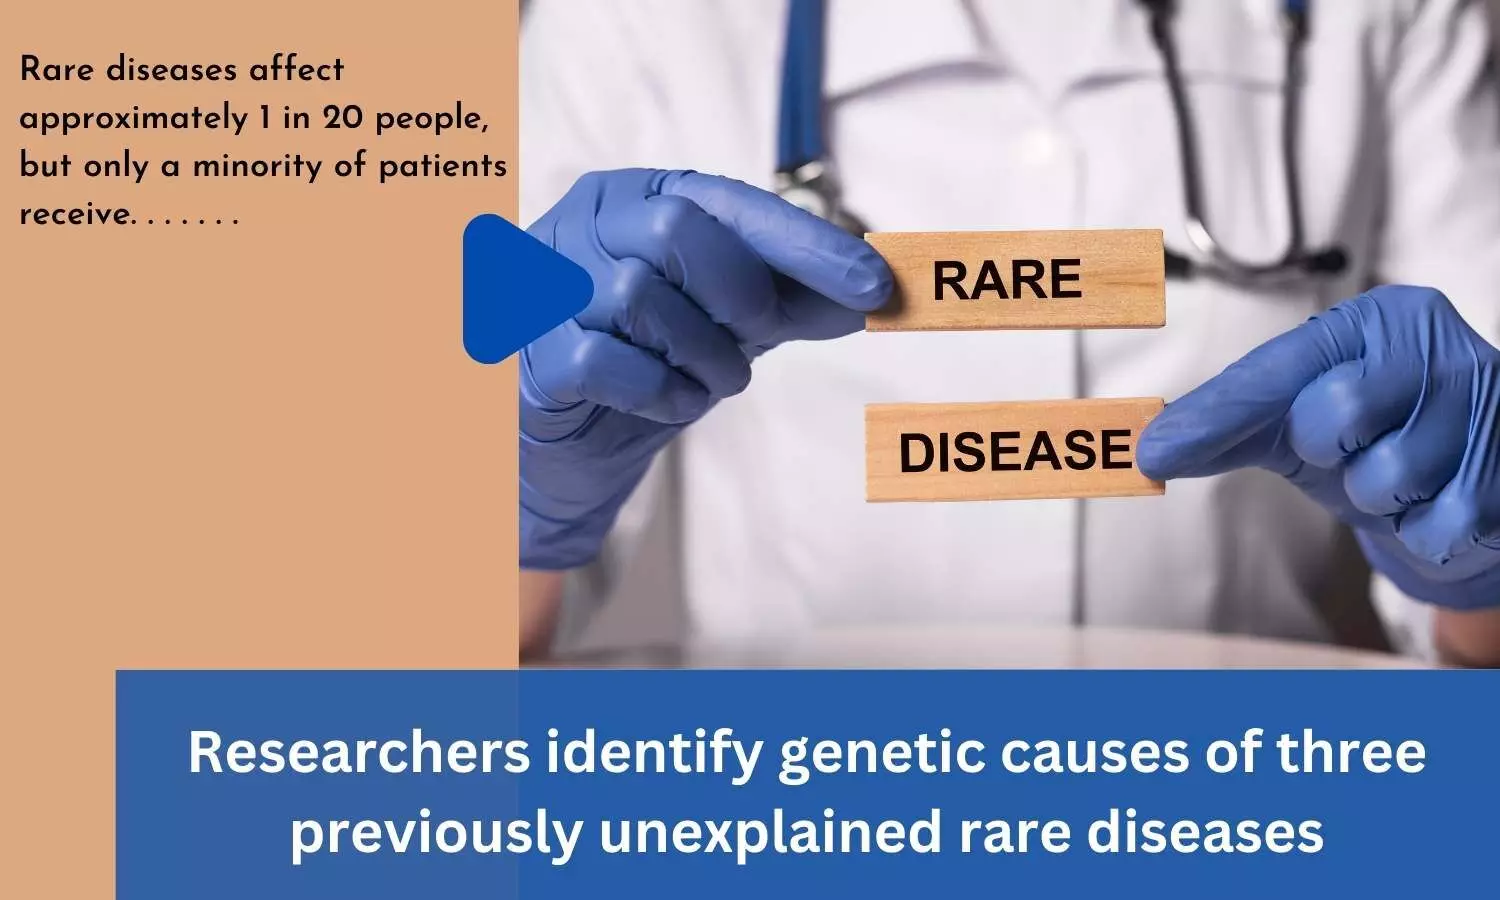 Researchers identify genetic causes of three previously unexplained rare diseases